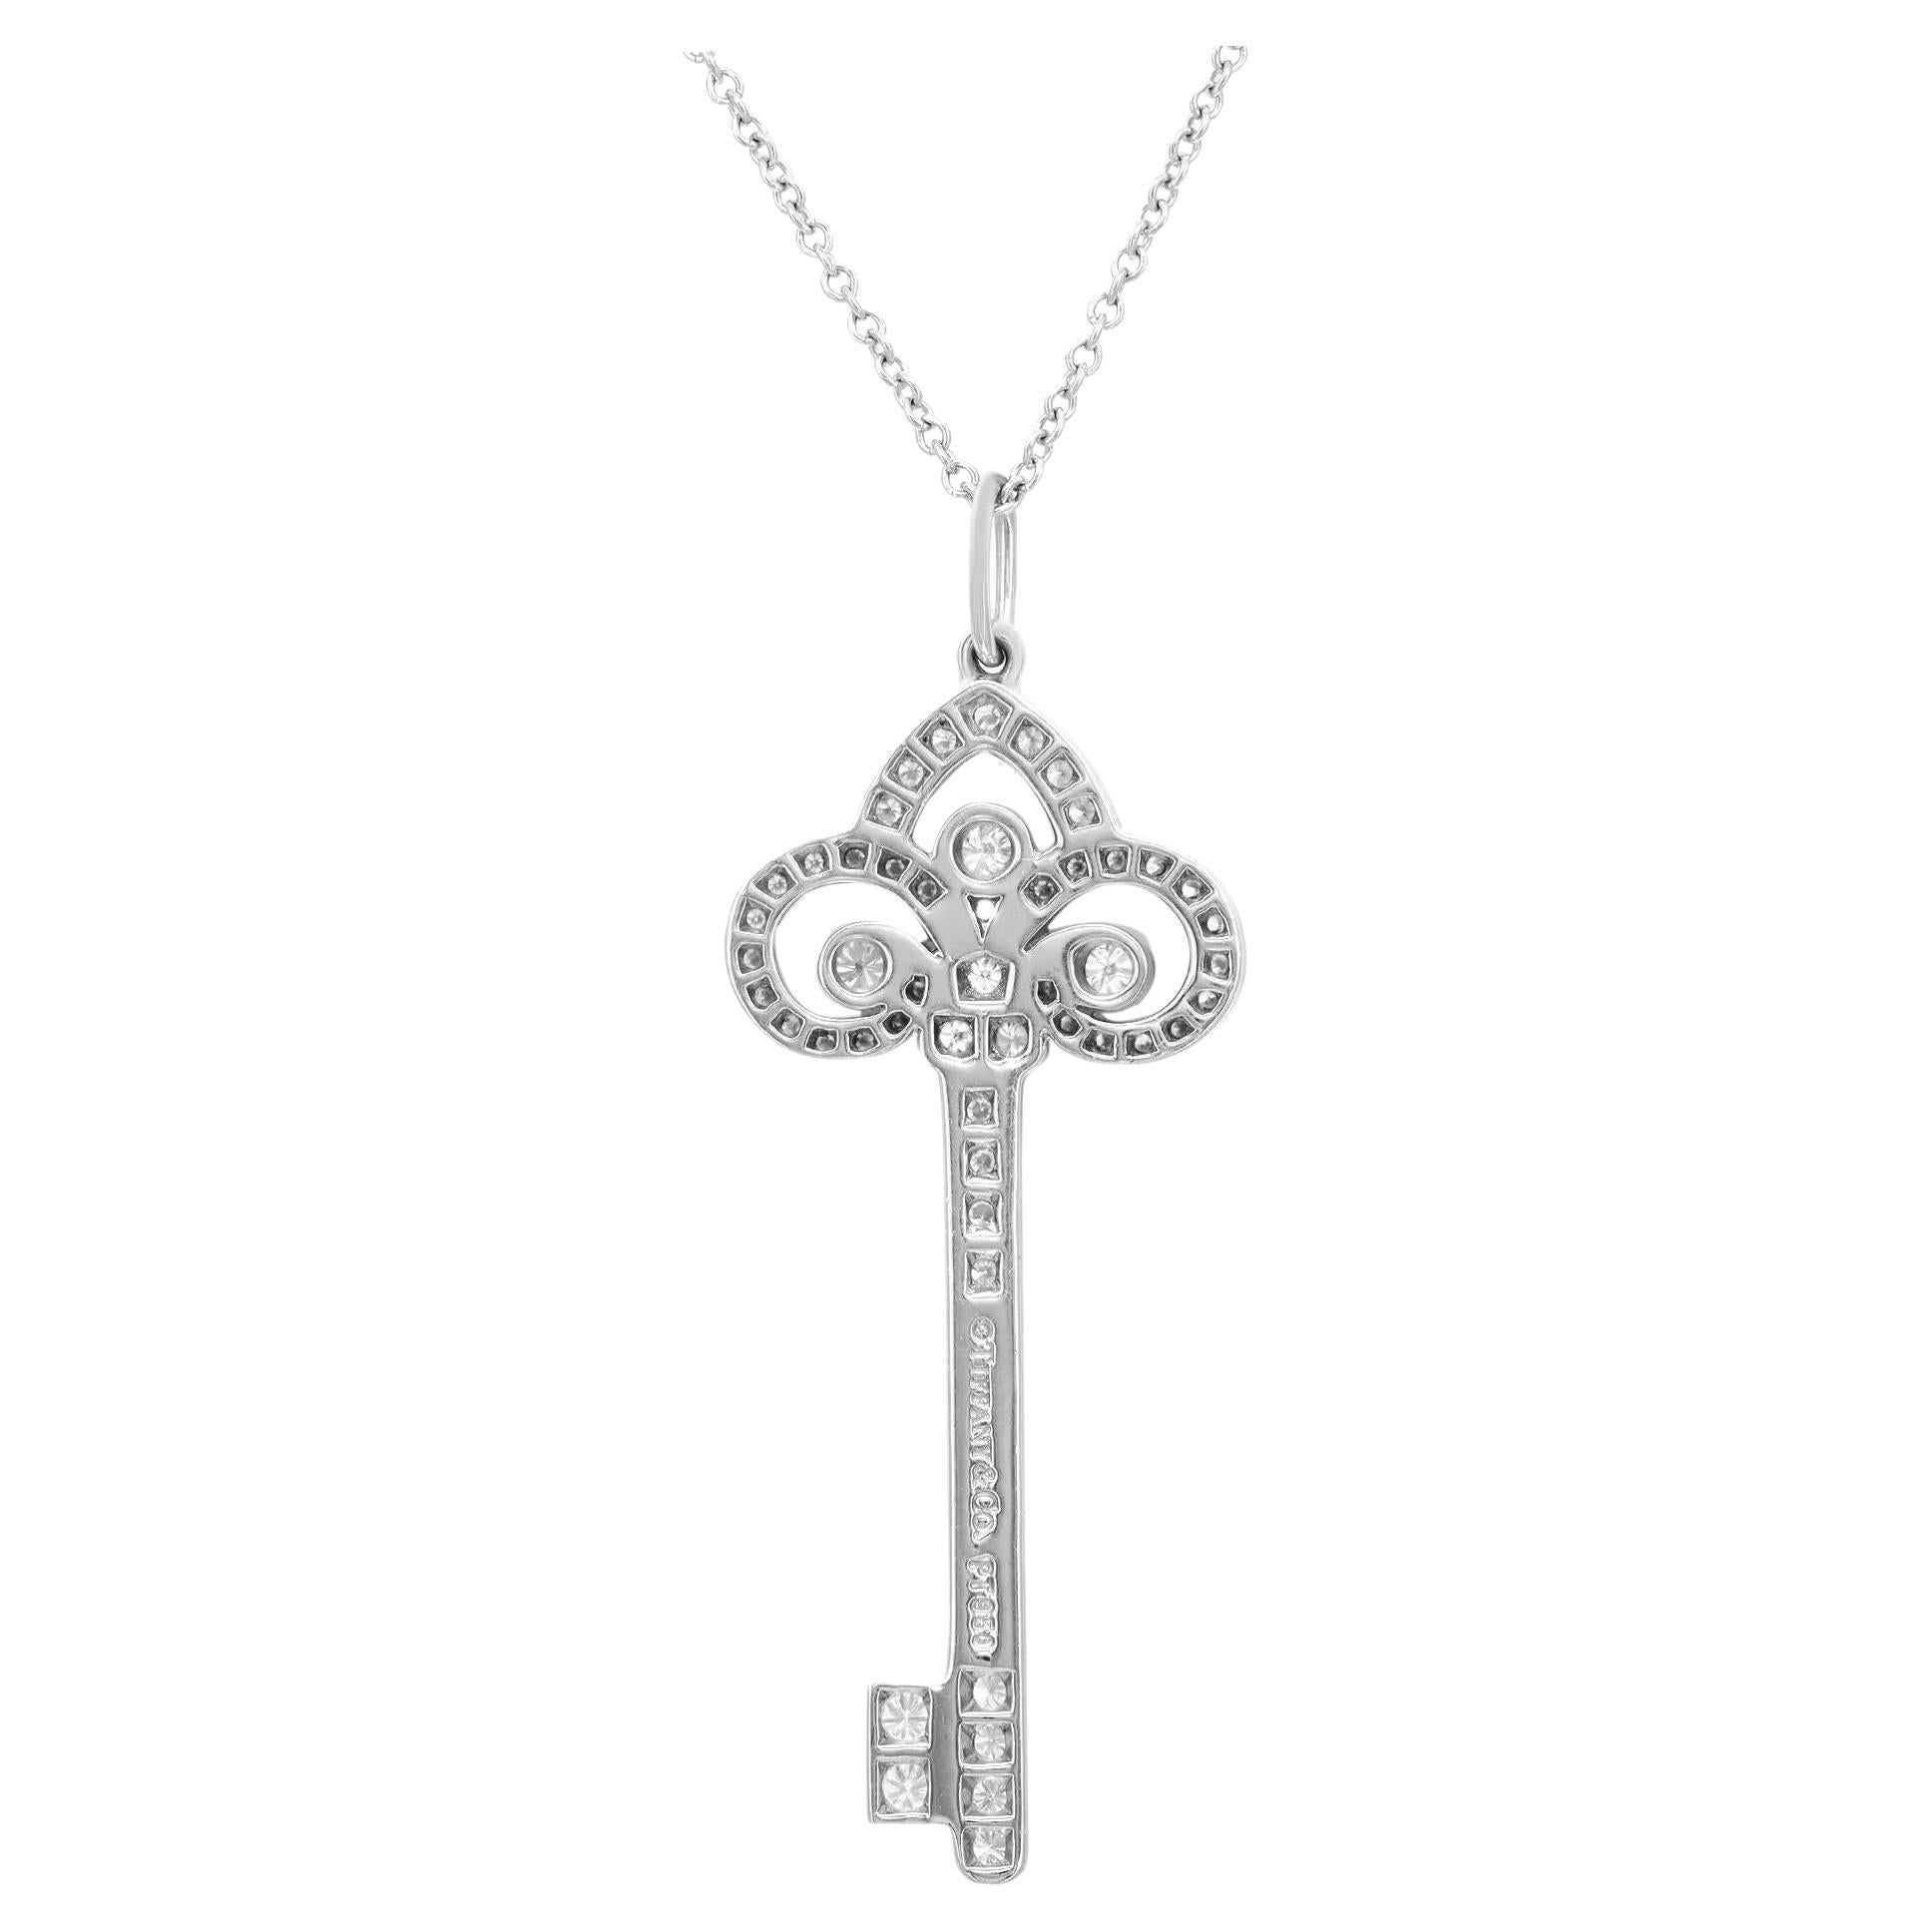 Fabulous and chic, this dazzling Tiffany & Co Fleur De Lis Diamond Key Pendant Necklace is a standout addition to your everyday and evening looks. This piece gives a touch of elegance to any ensemble you stack it with. Crafted in high polished